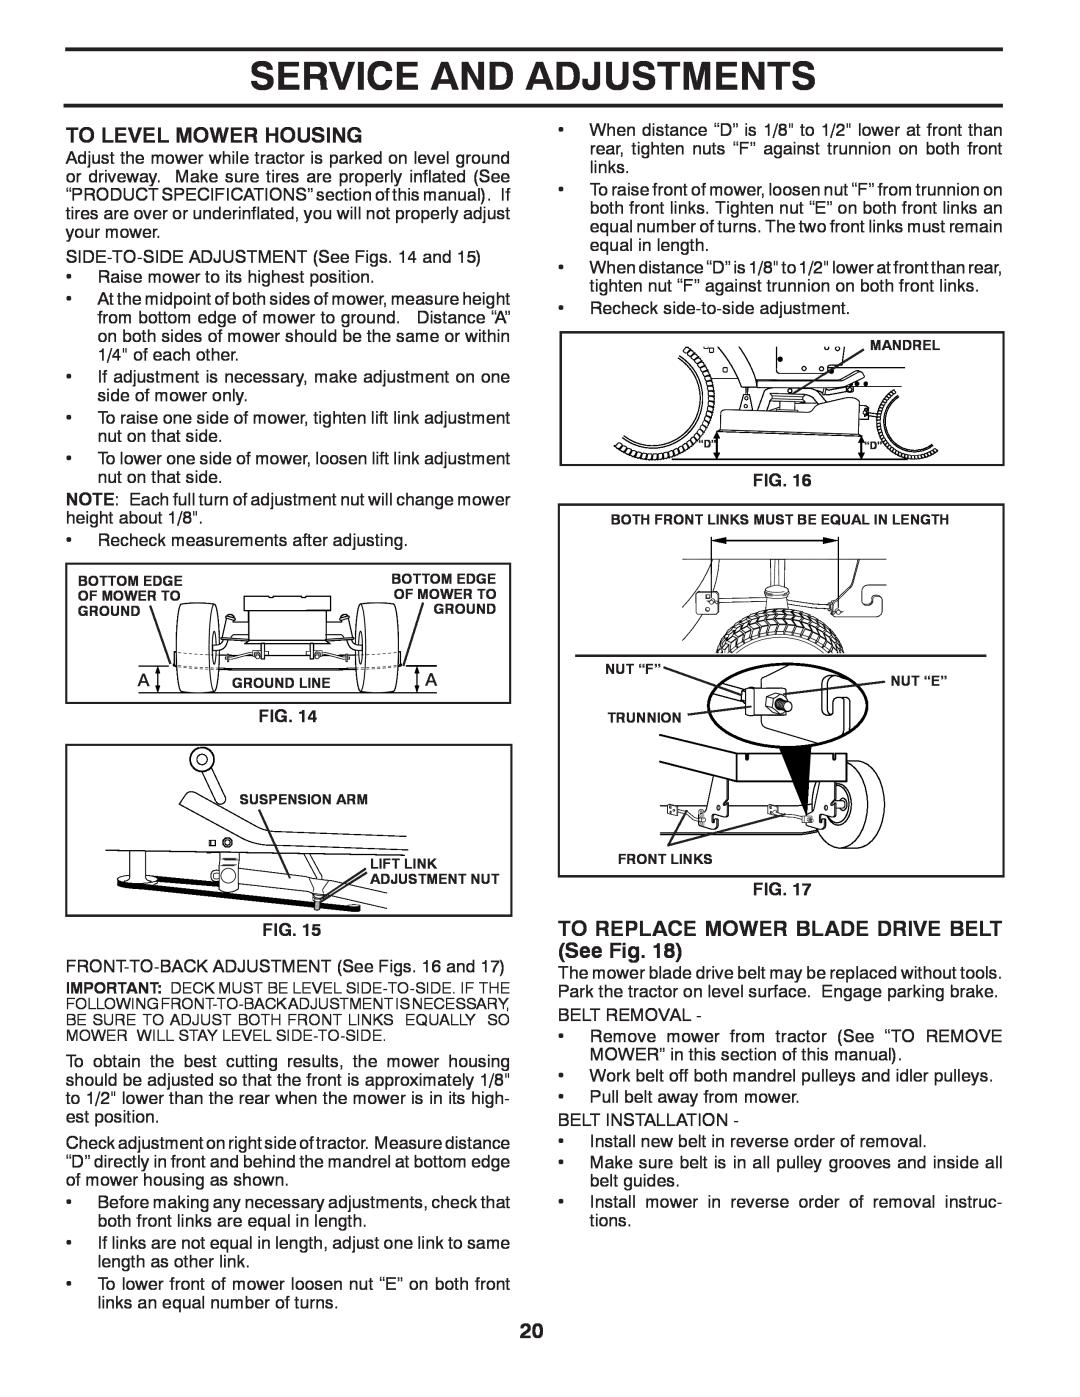 Murray 96012007200 manual To Level Mower Housing, TO REPLACE MOWER BLADE DRIVE BELT See Fig, Service And Adjustments 